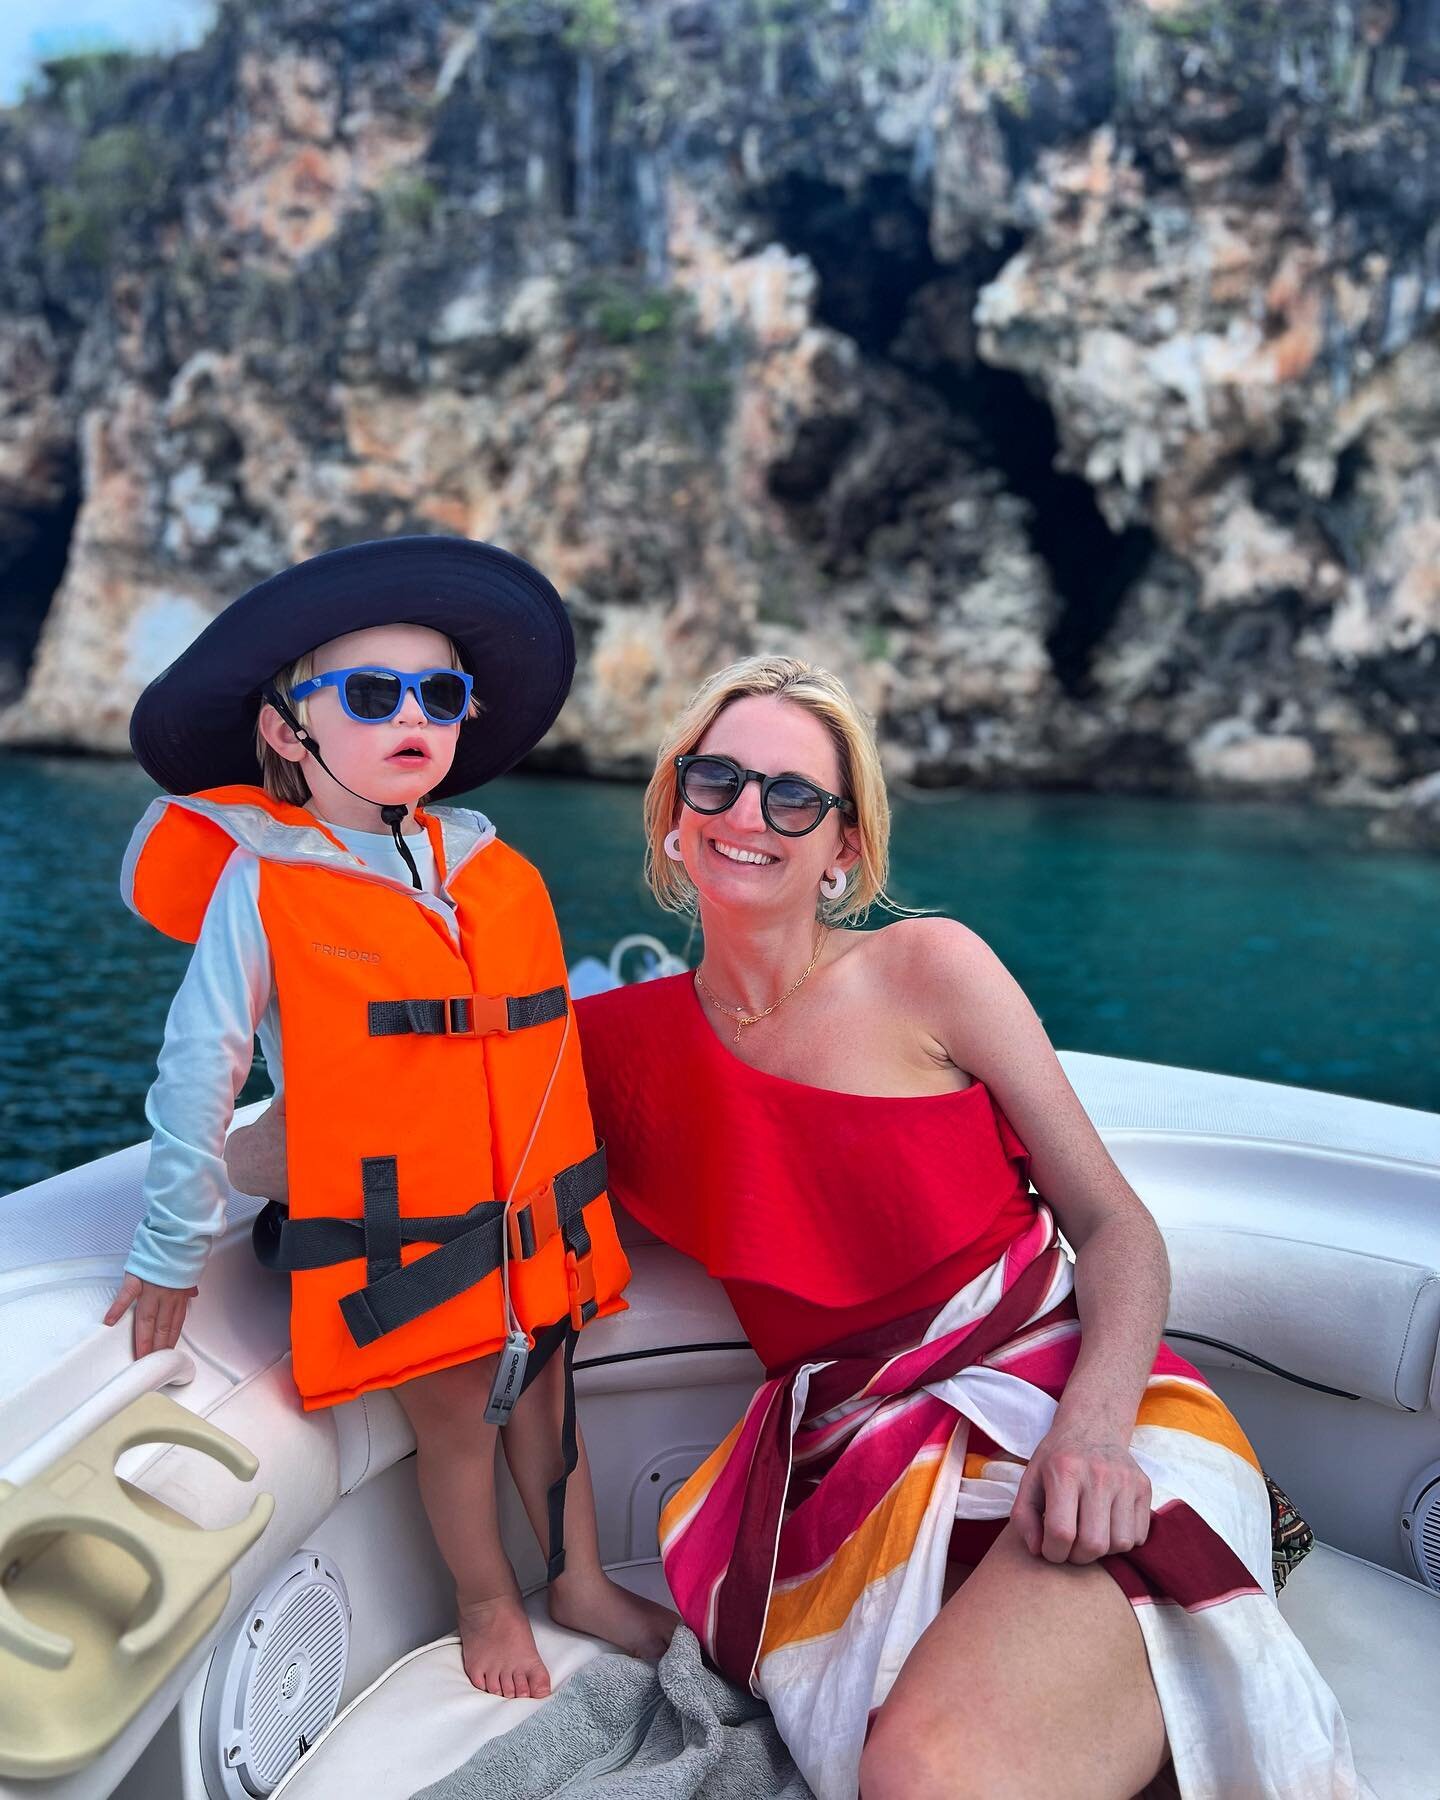 To all the mom&rsquo;s out there &amp; to all of those who love like a mom &mdash; happy Mother&rsquo;s Day! 

Nothing says mom like a life jacket, hat, sunglasses, rash guard, sunscreen and a clinched grip for the entire boat ride 🌸❤️☀️